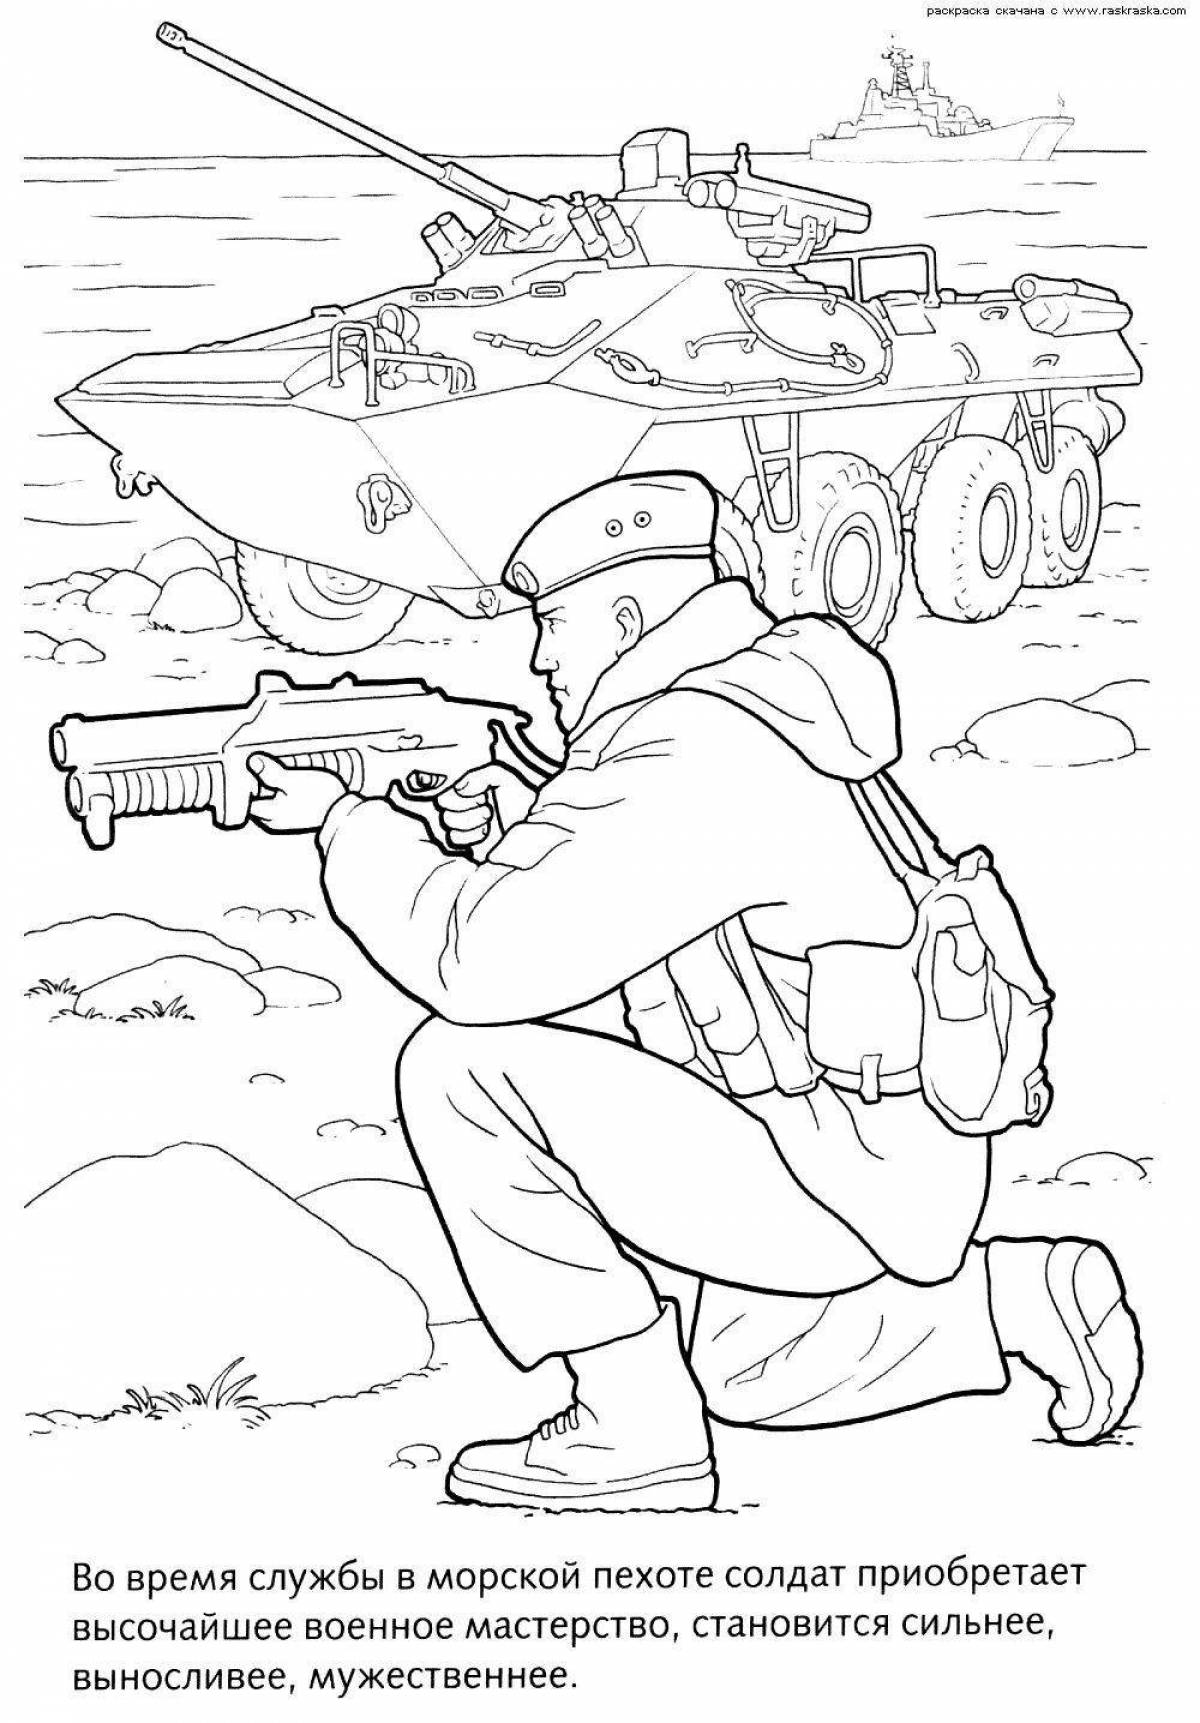 Great soldier coloring book for kids